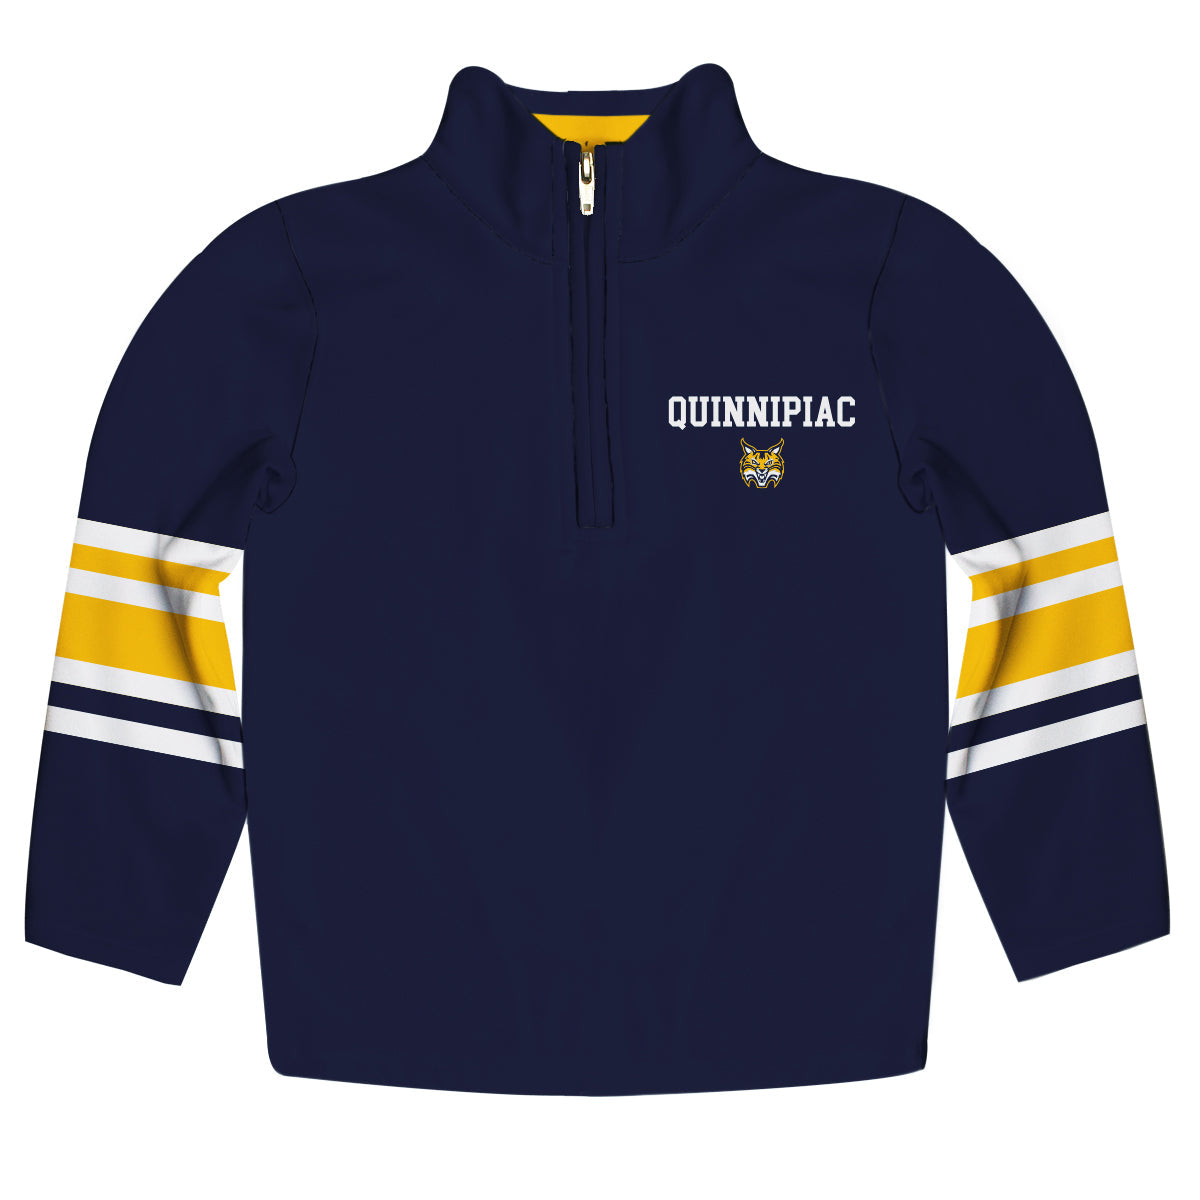 Quinnipiac Bobcats Game Day Navy Quarter Zip Pullover for Infants Toddlers by Vive La Fete